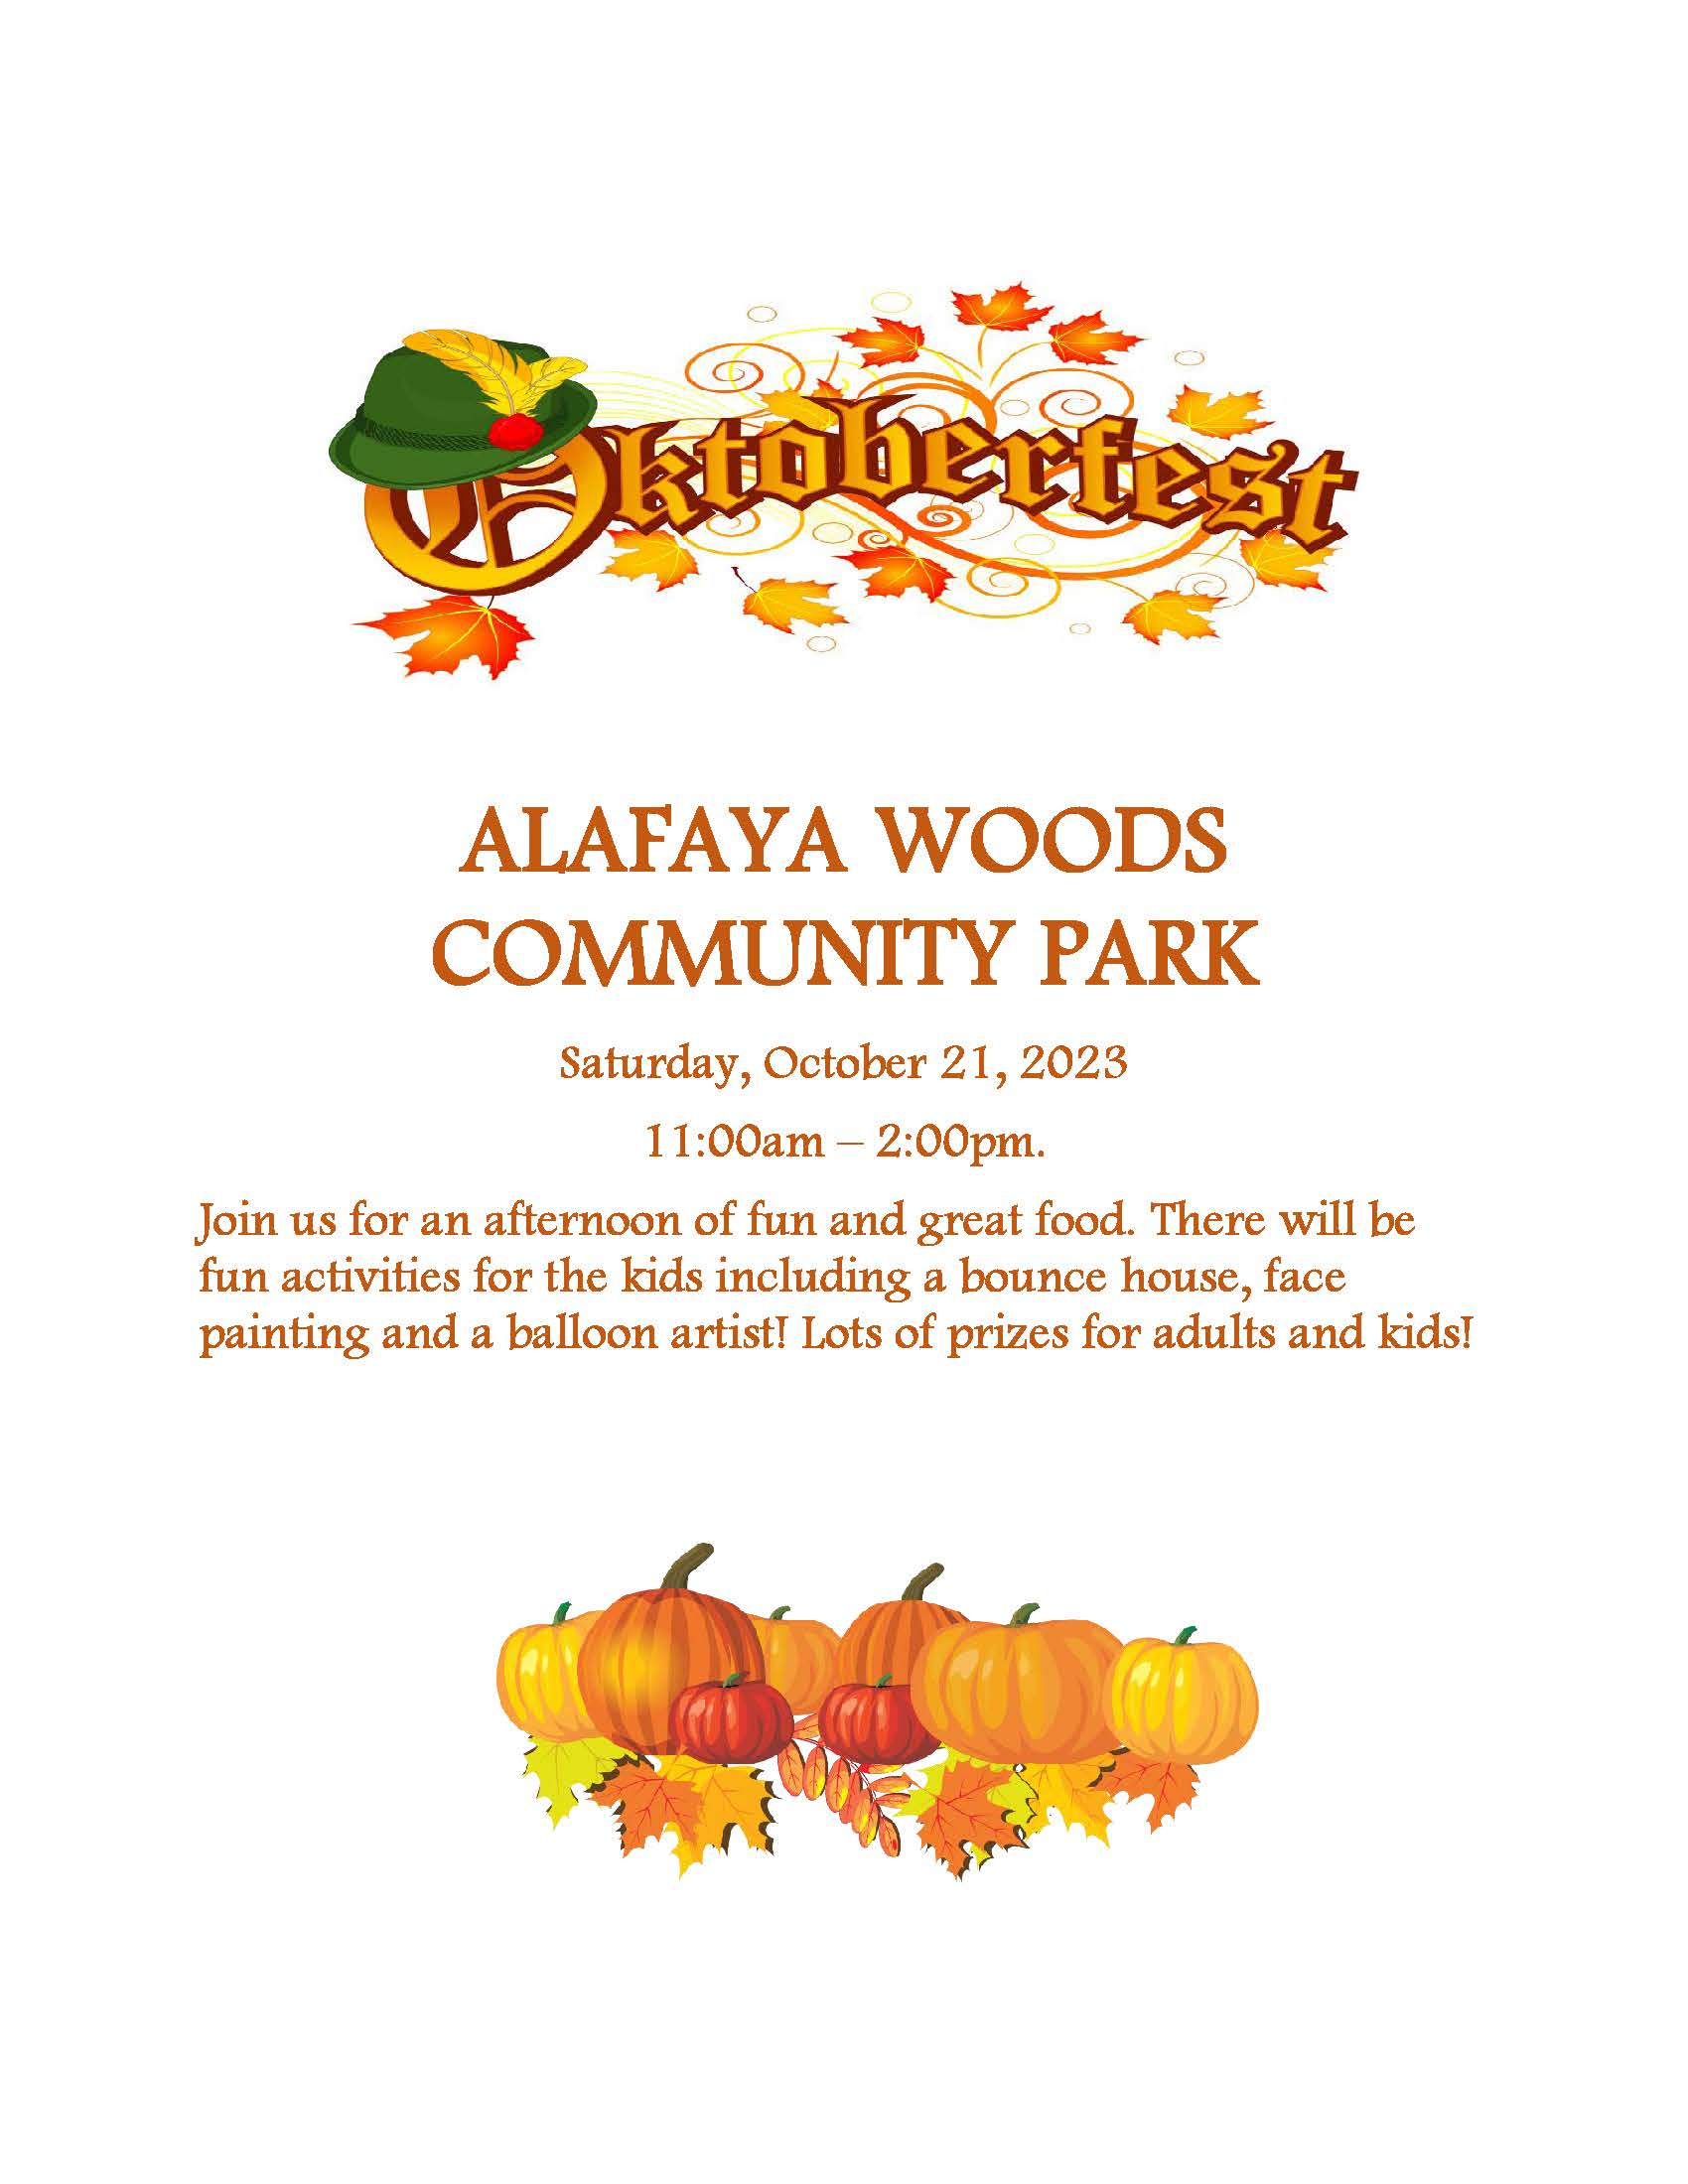 Oktoberfest 2023 - ALAFAYA WOODS COMMUNITY PARK Saturday, October 21, 2023 11:00am – 2:00pm. Join us for an afternoon of fun and great food. There will be fun activities for the kids including a bounce house, face painting and a balloon artist! Lots of prizes for adults and kids! 